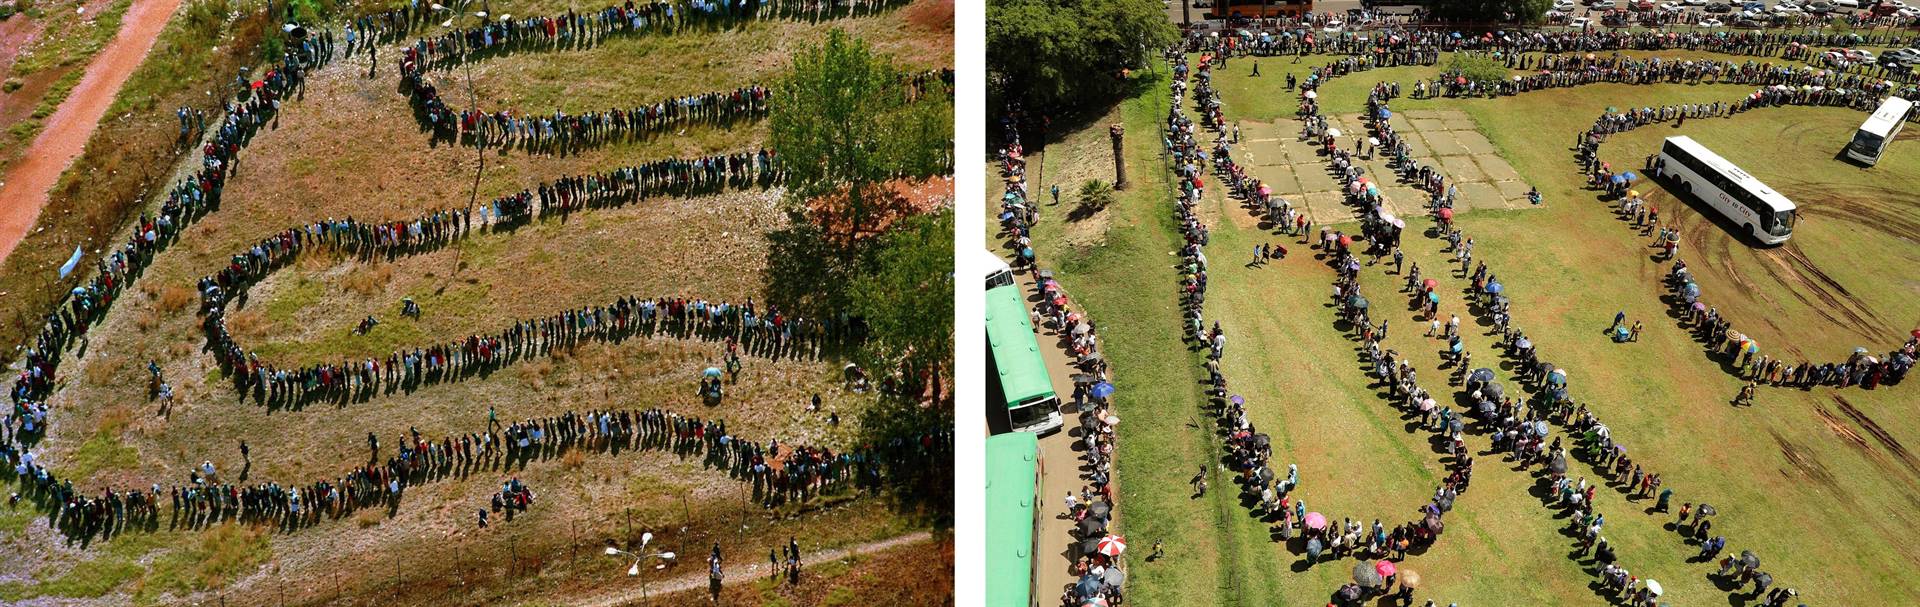 Long queues of people wait outside the polling station in Soweto during the first all-race elections in 1994 